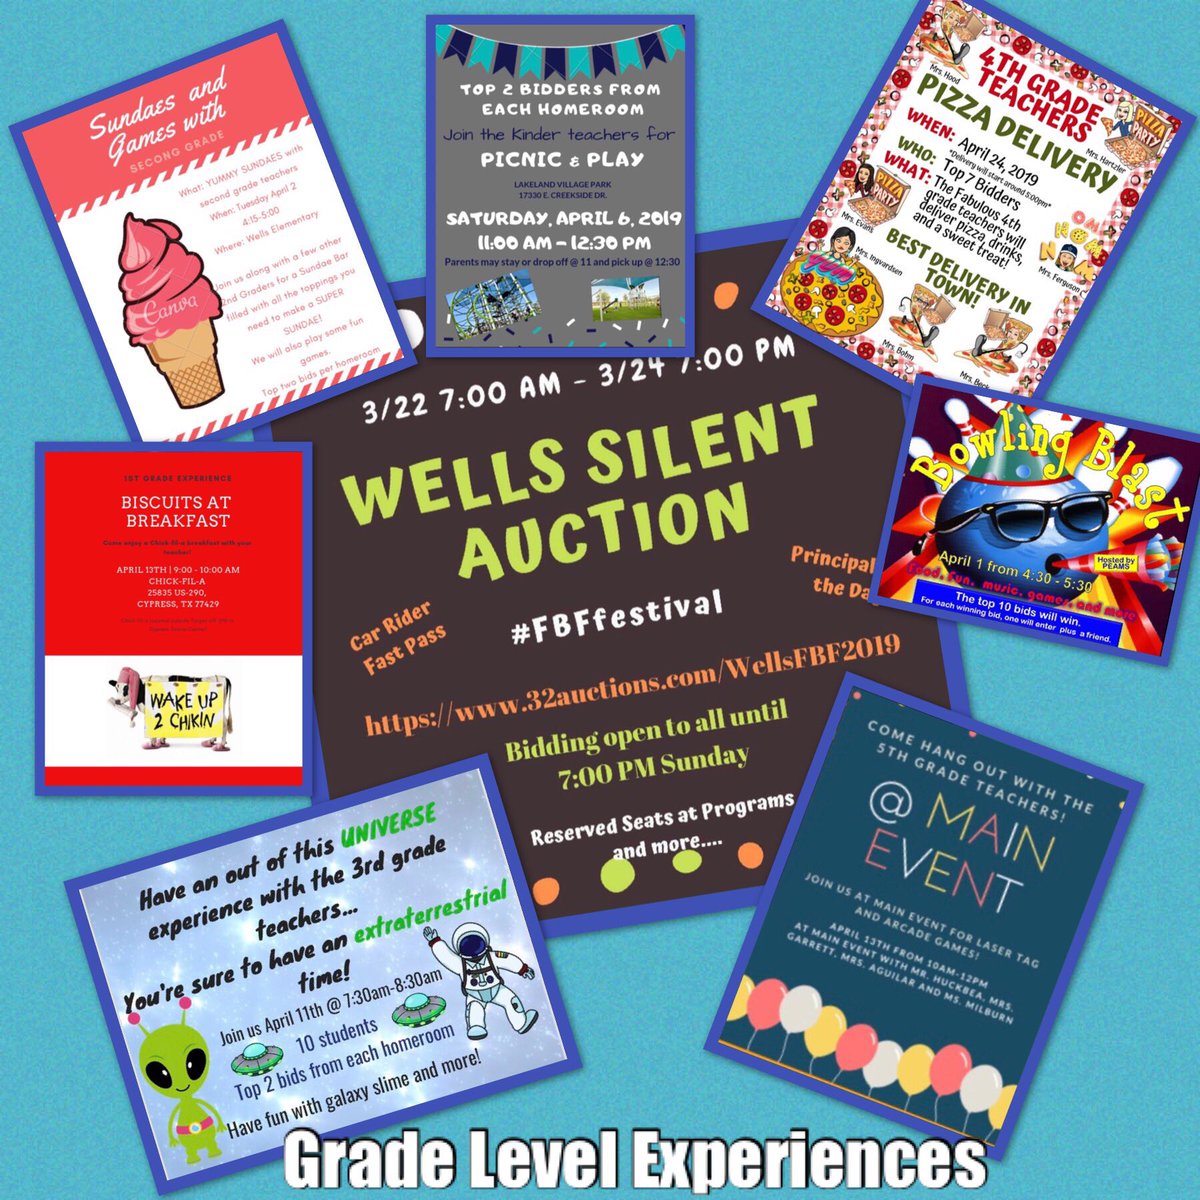 Our #FBFfestival auction closes at 7:00pm tonight! Check out 32auctions.com/WellsFBF2019 to bid on our amazing theme baskets and events! #FBFfestival #ExoloreWells